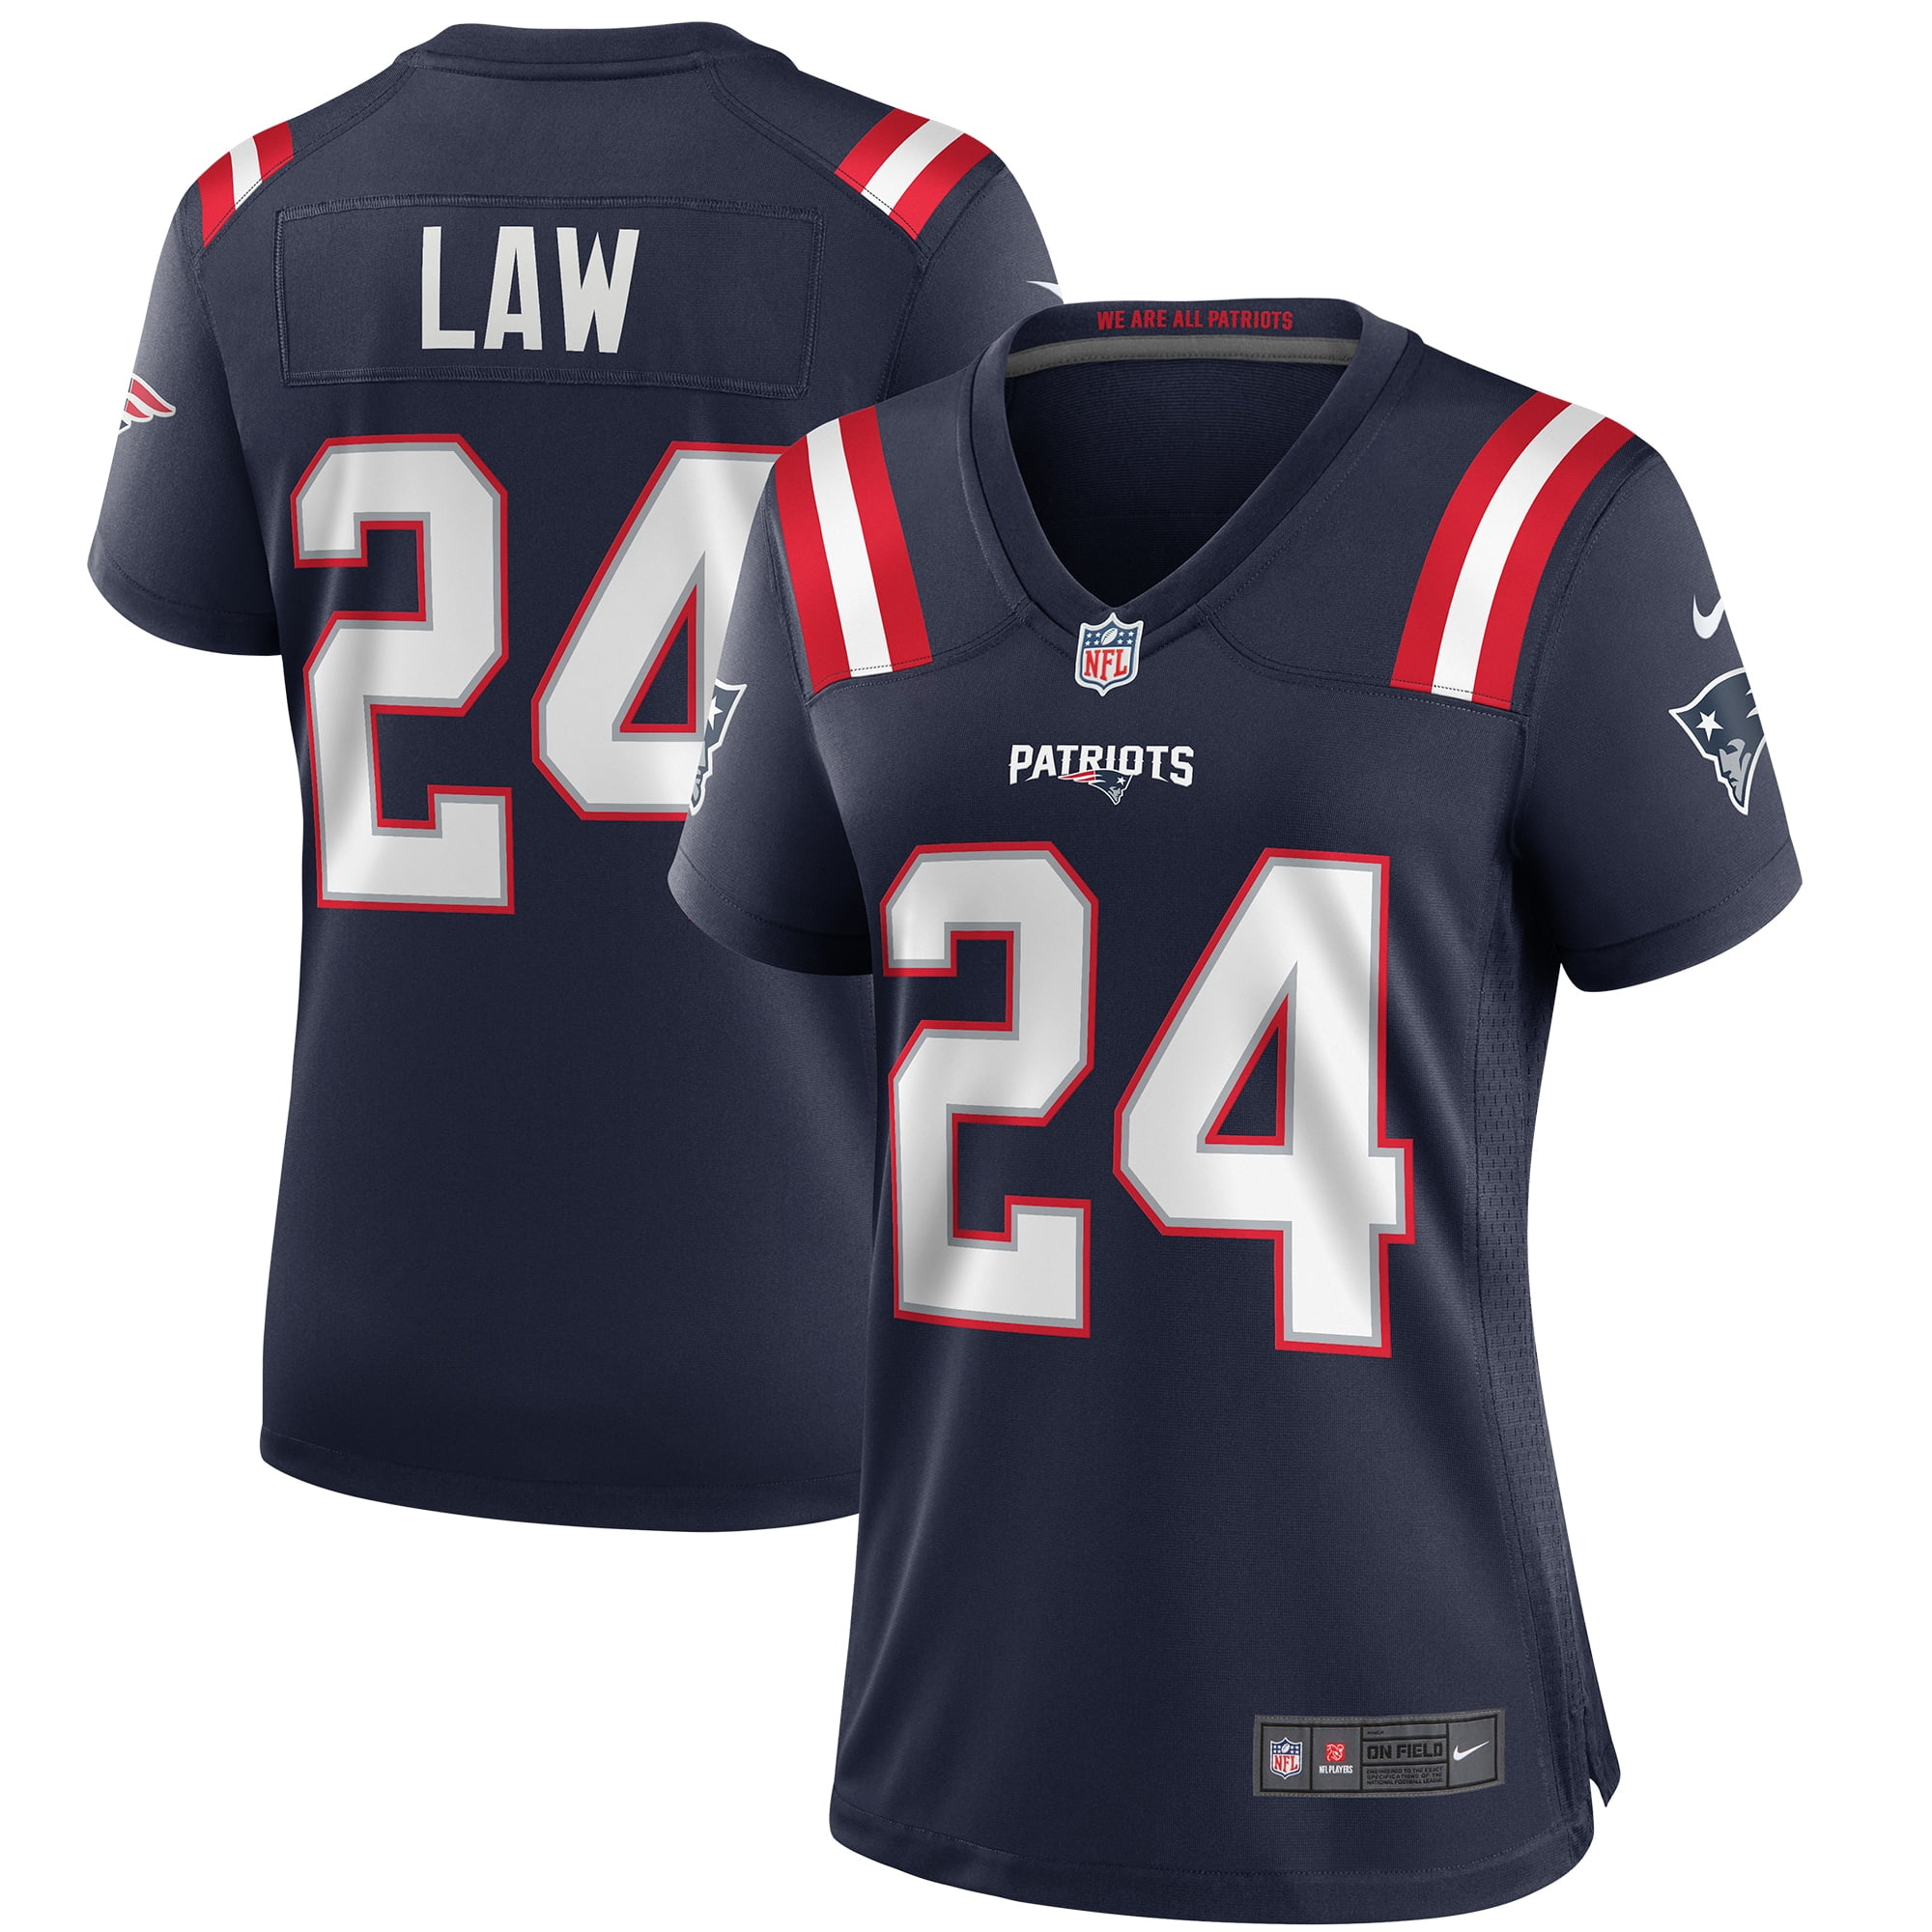 ty law jersey 90s